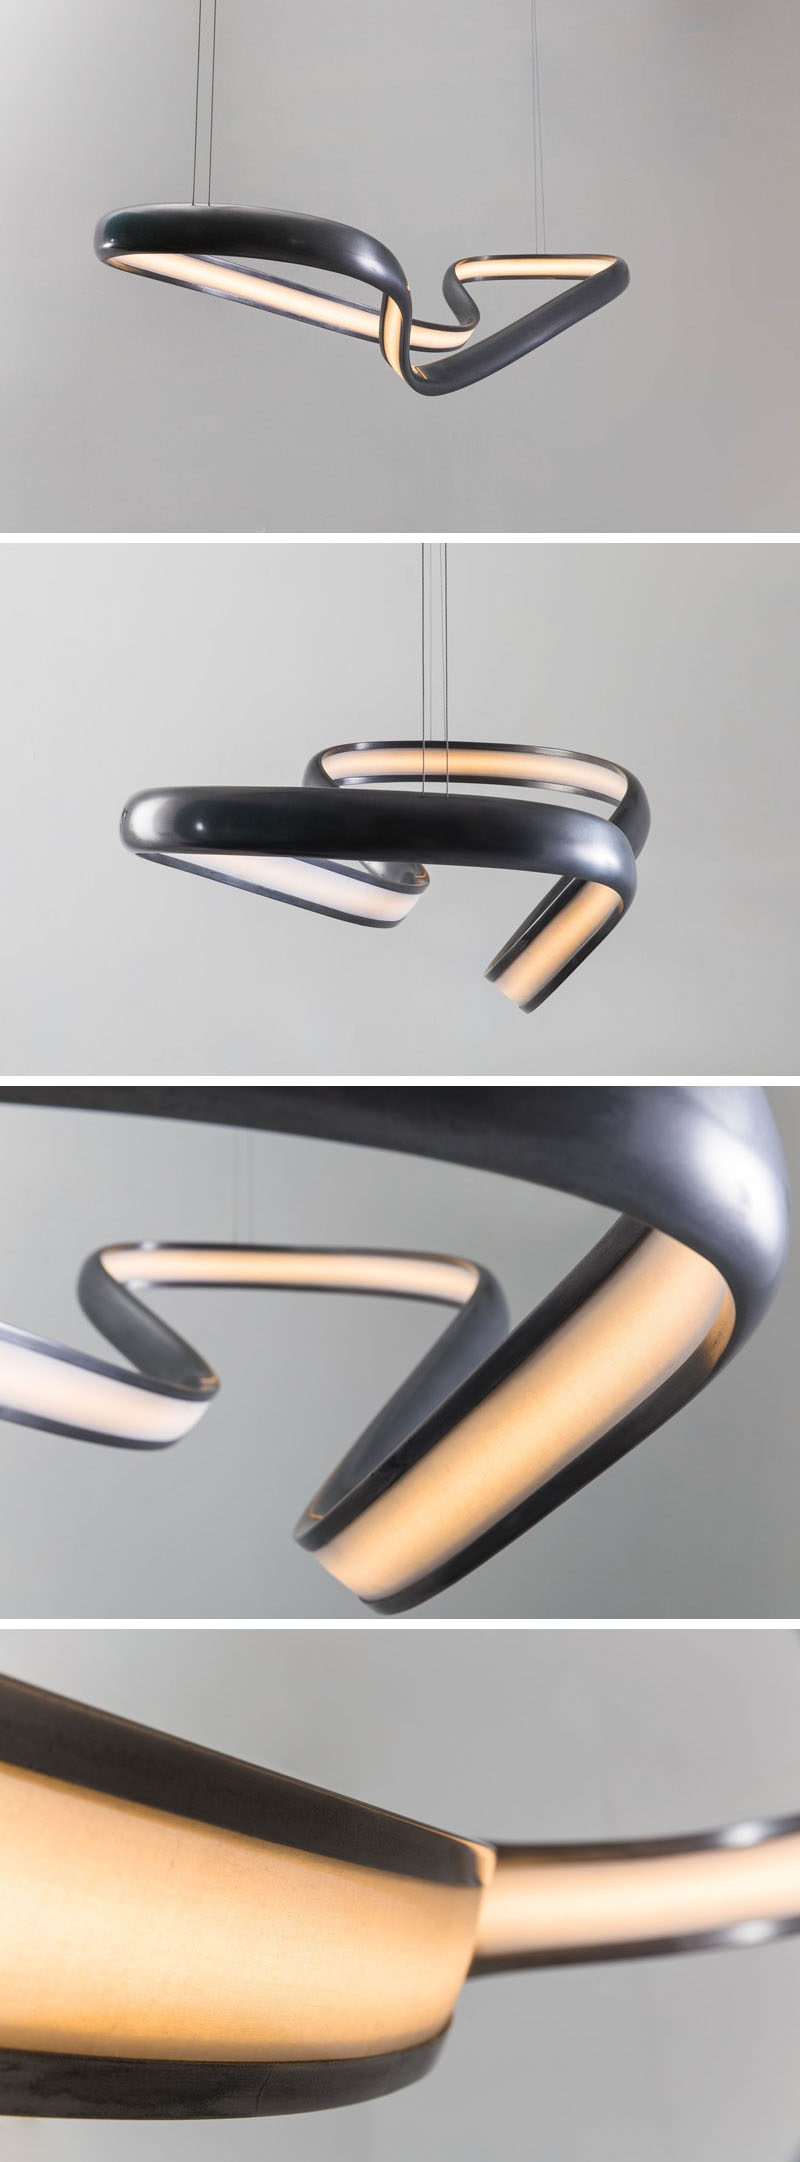 New York based designer John Procario of Procario Design, has combined his love for sculpture and lighting, and transformed it into a series of pieces named Freeform.